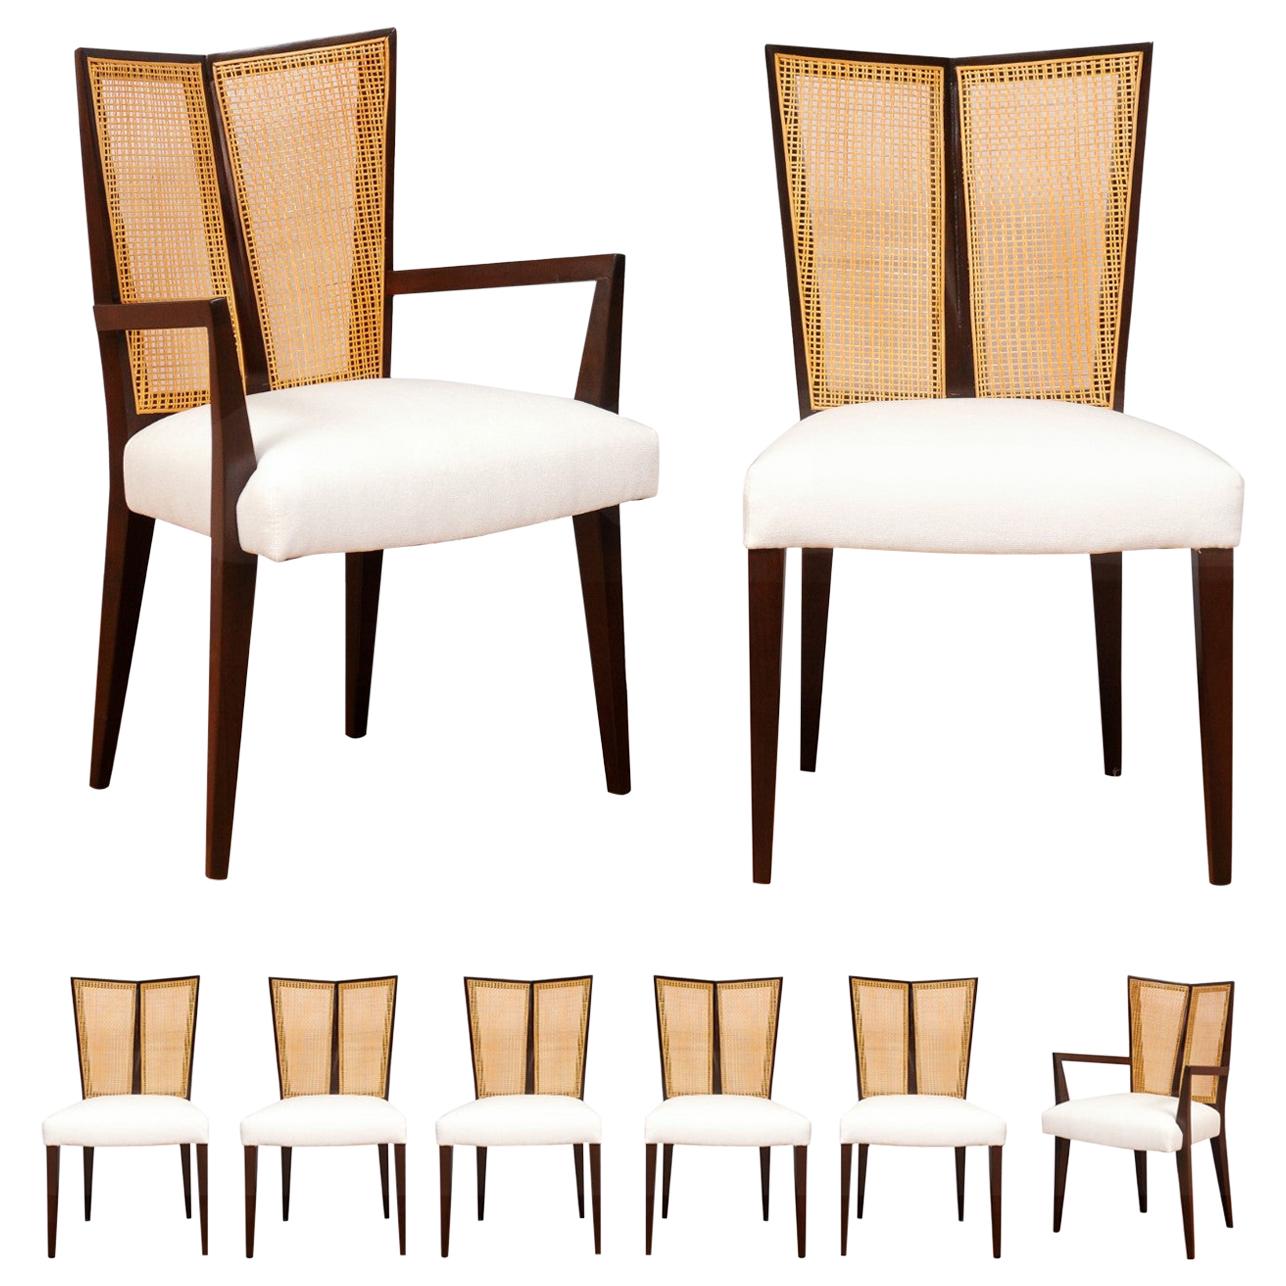 Breathtaking Set of 8 Modern V-Back Cane Chairs by Michael Taylor, circa 1960